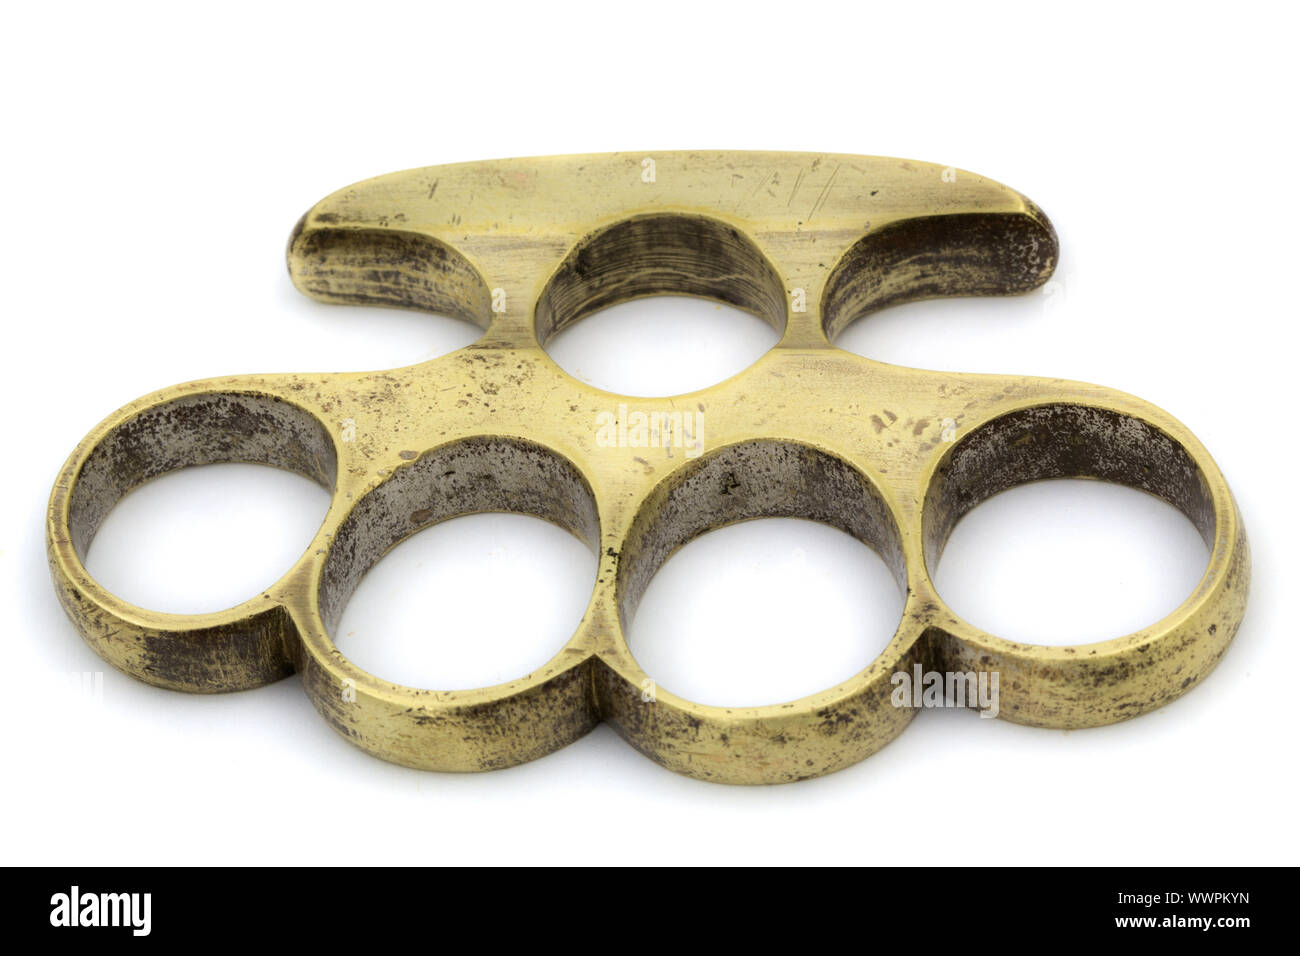 Brass knuckle-duster, weapon for hand, isolated on white